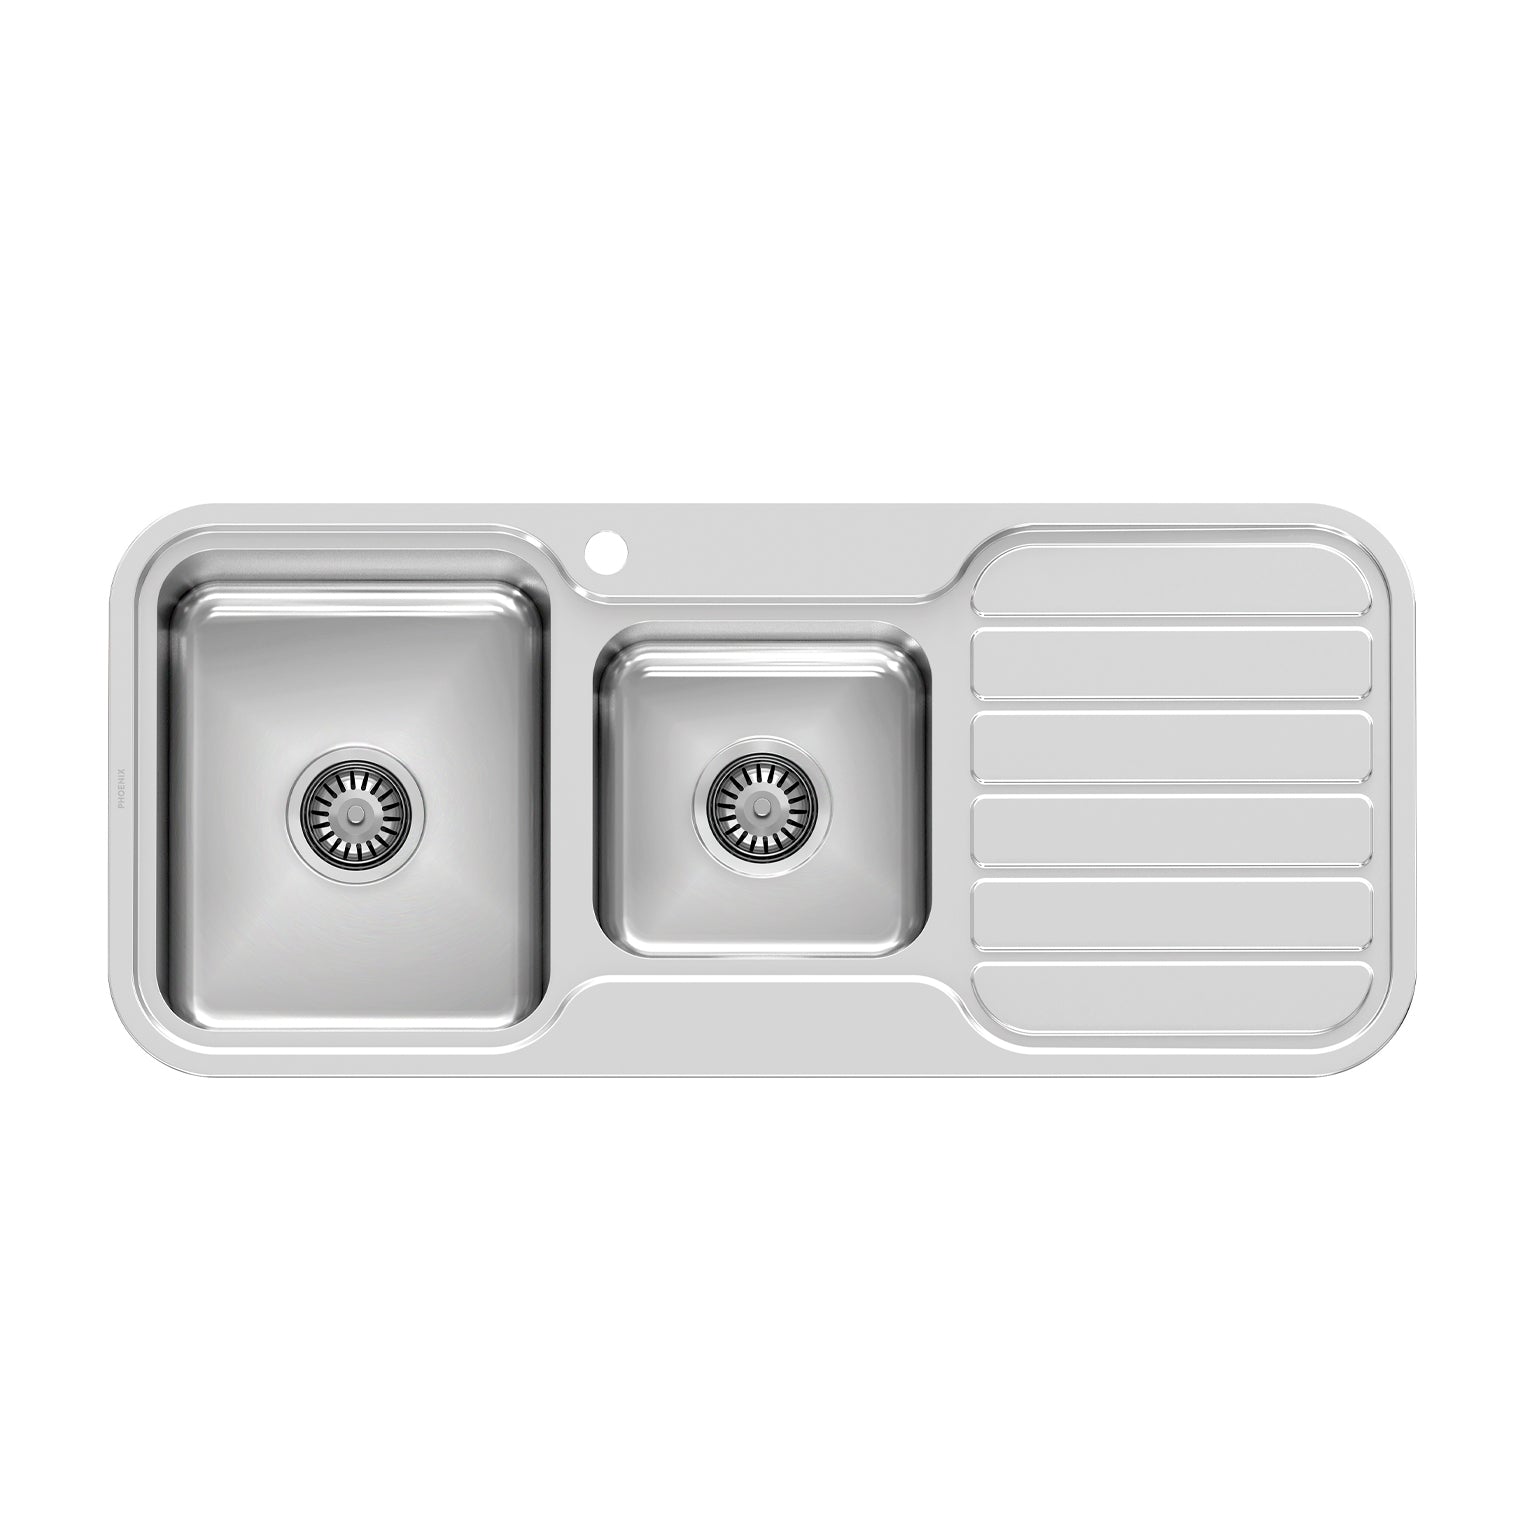 PHOENIX 1000 SERIES 1 AND 3/4 BOWL SINK WITH DRAINER AND TAPHOLE 1080MM